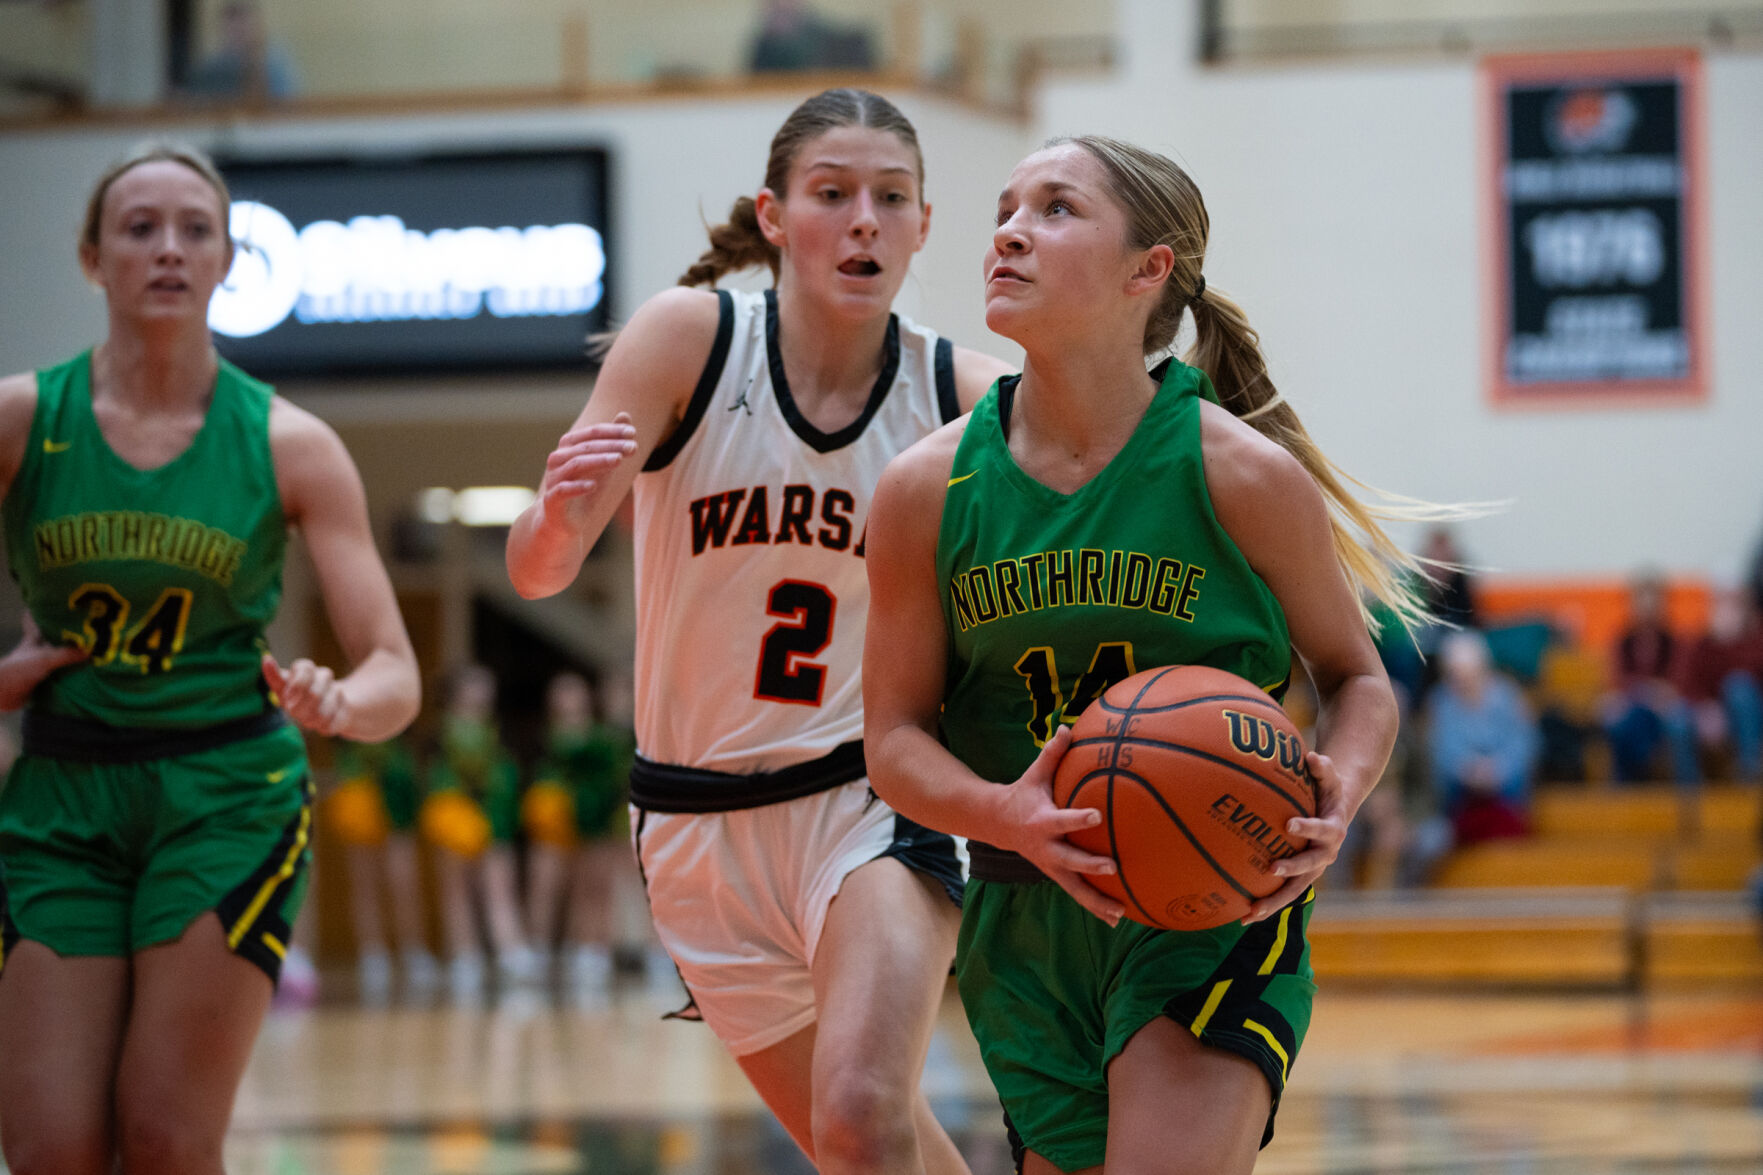 High School Girls Basketball Sectional Pairings Announced: Northridge, West Noble, Eastside, and Lakewood Park Christian to Host